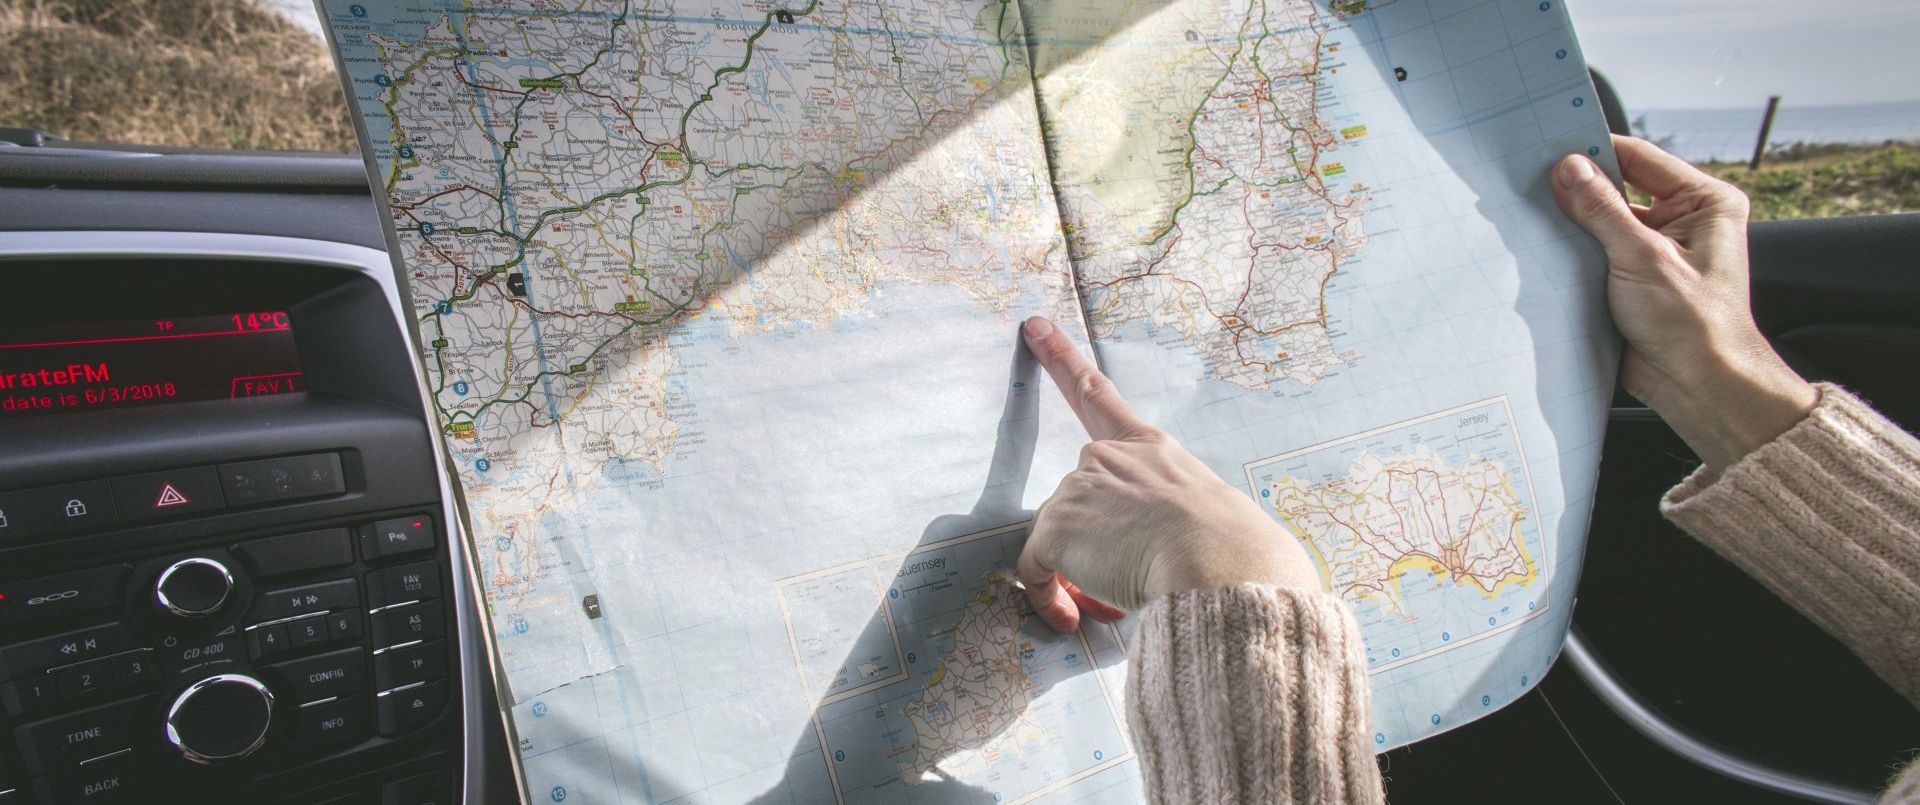 pointing at a map during a road trip